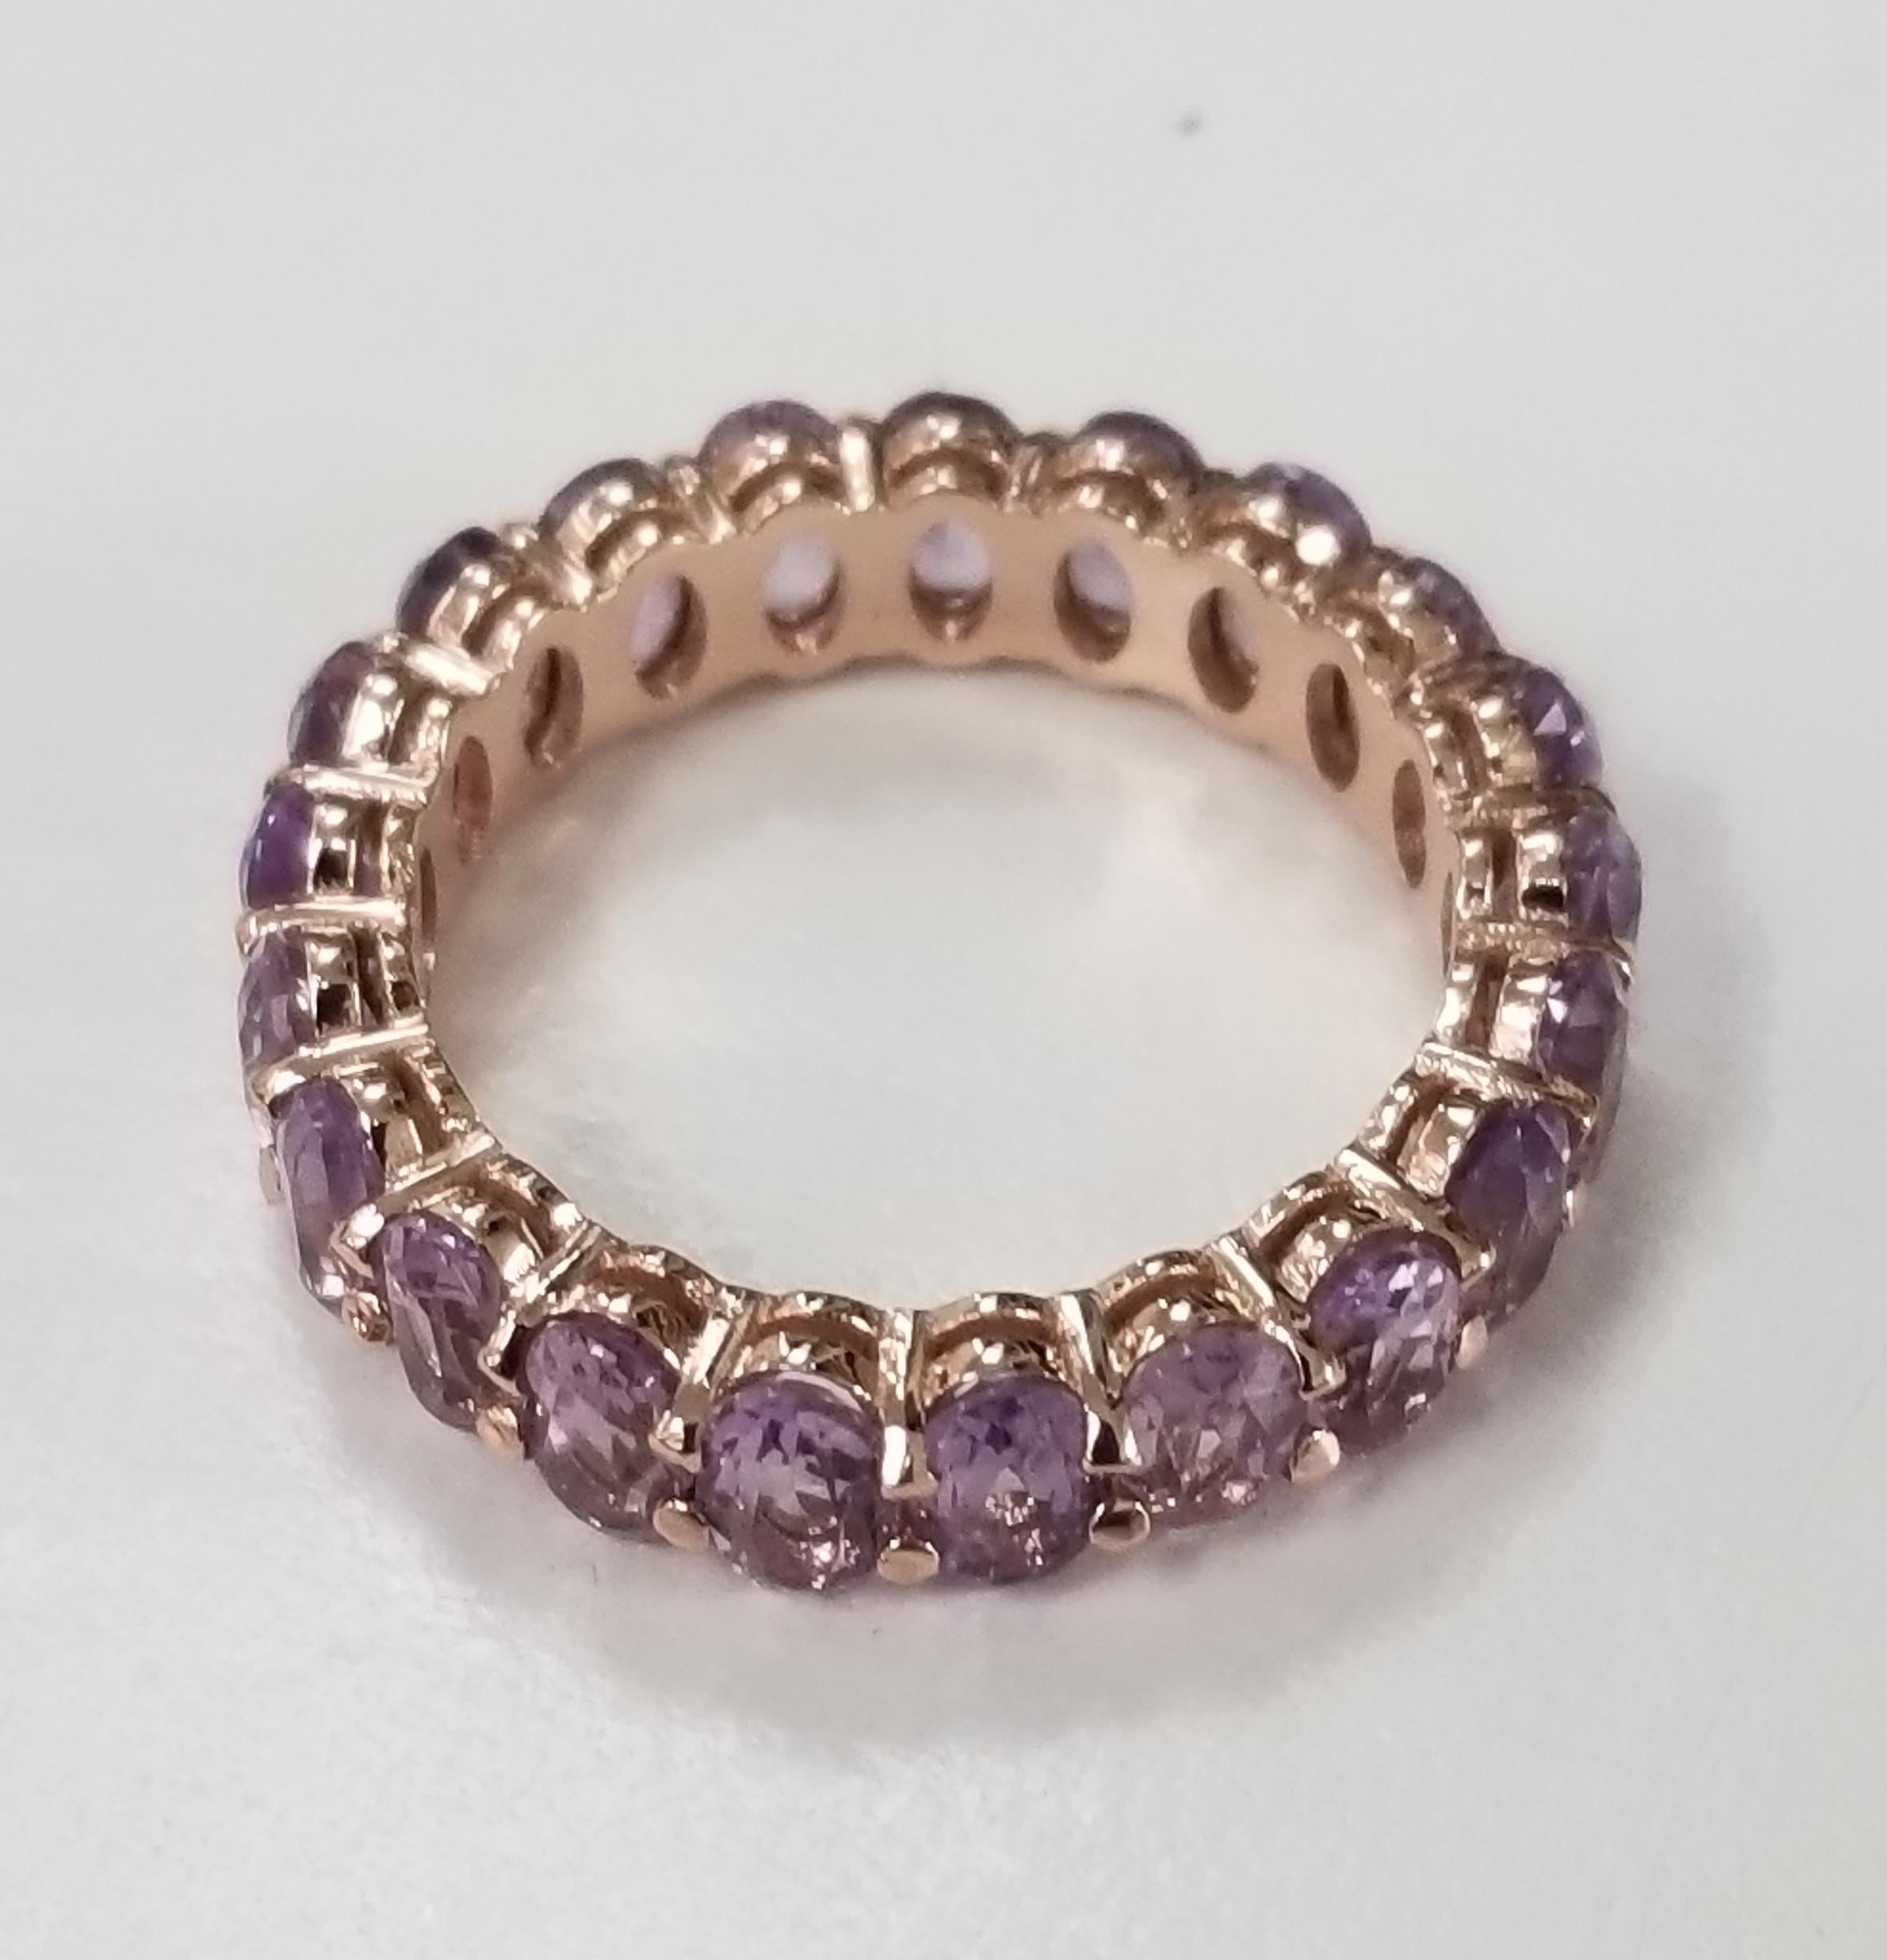 14 rose gold Amethyst oval cut eternity ring, containing 22 oval cut amethyst of gem qualilty weighing 5.02cts.  the ring is a size 7, we can make a new ring to fit for an adjusted price either up or down, depending on the size.